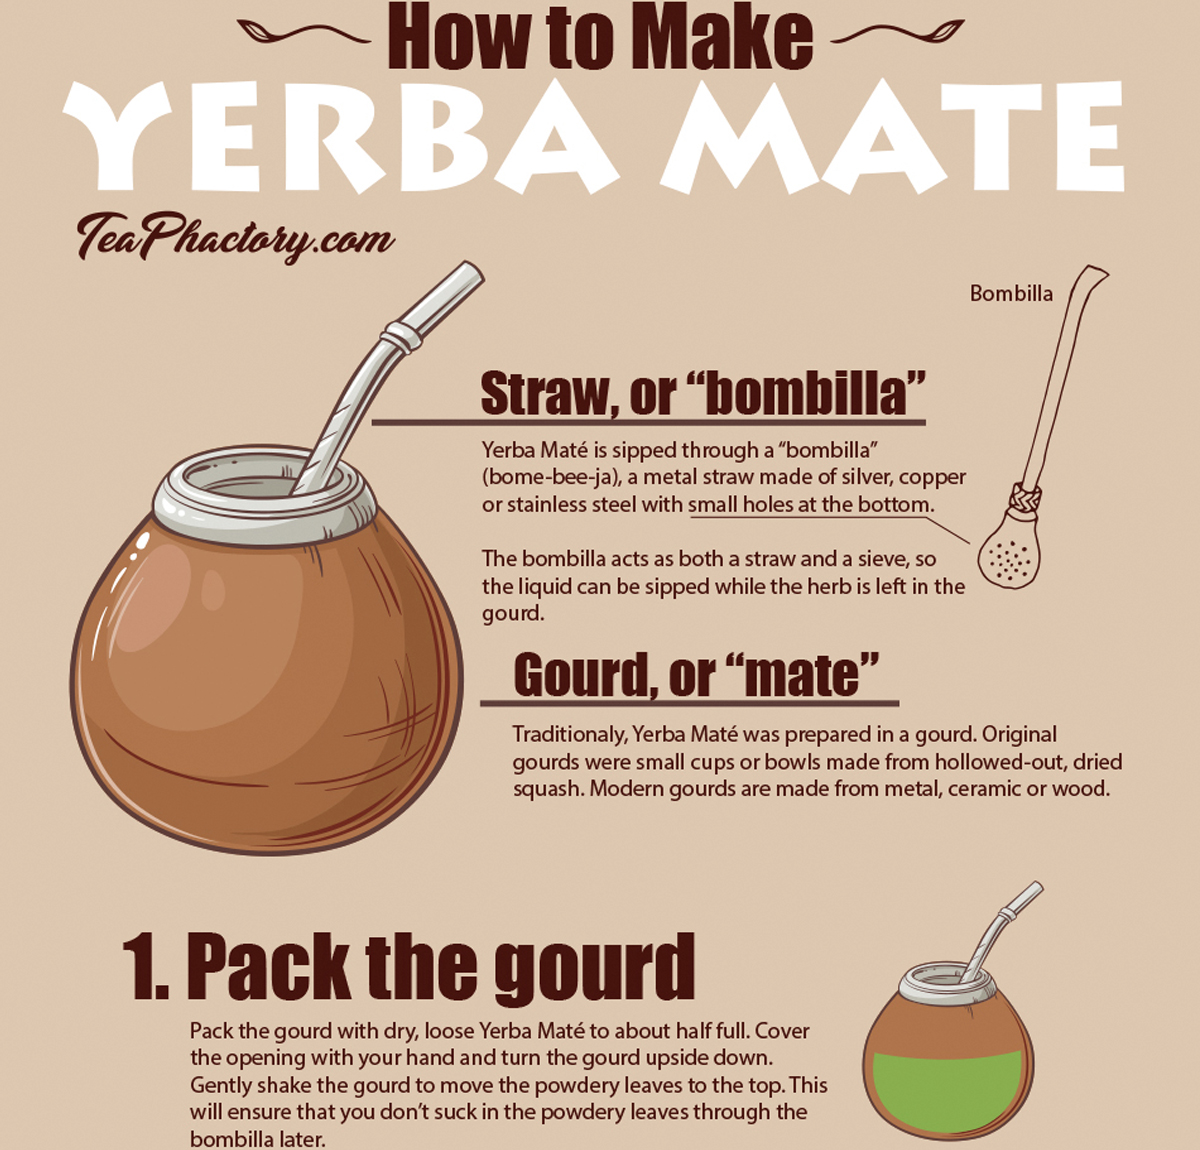 How to Make Yerbe Mate Digital Infographic and Print Poster